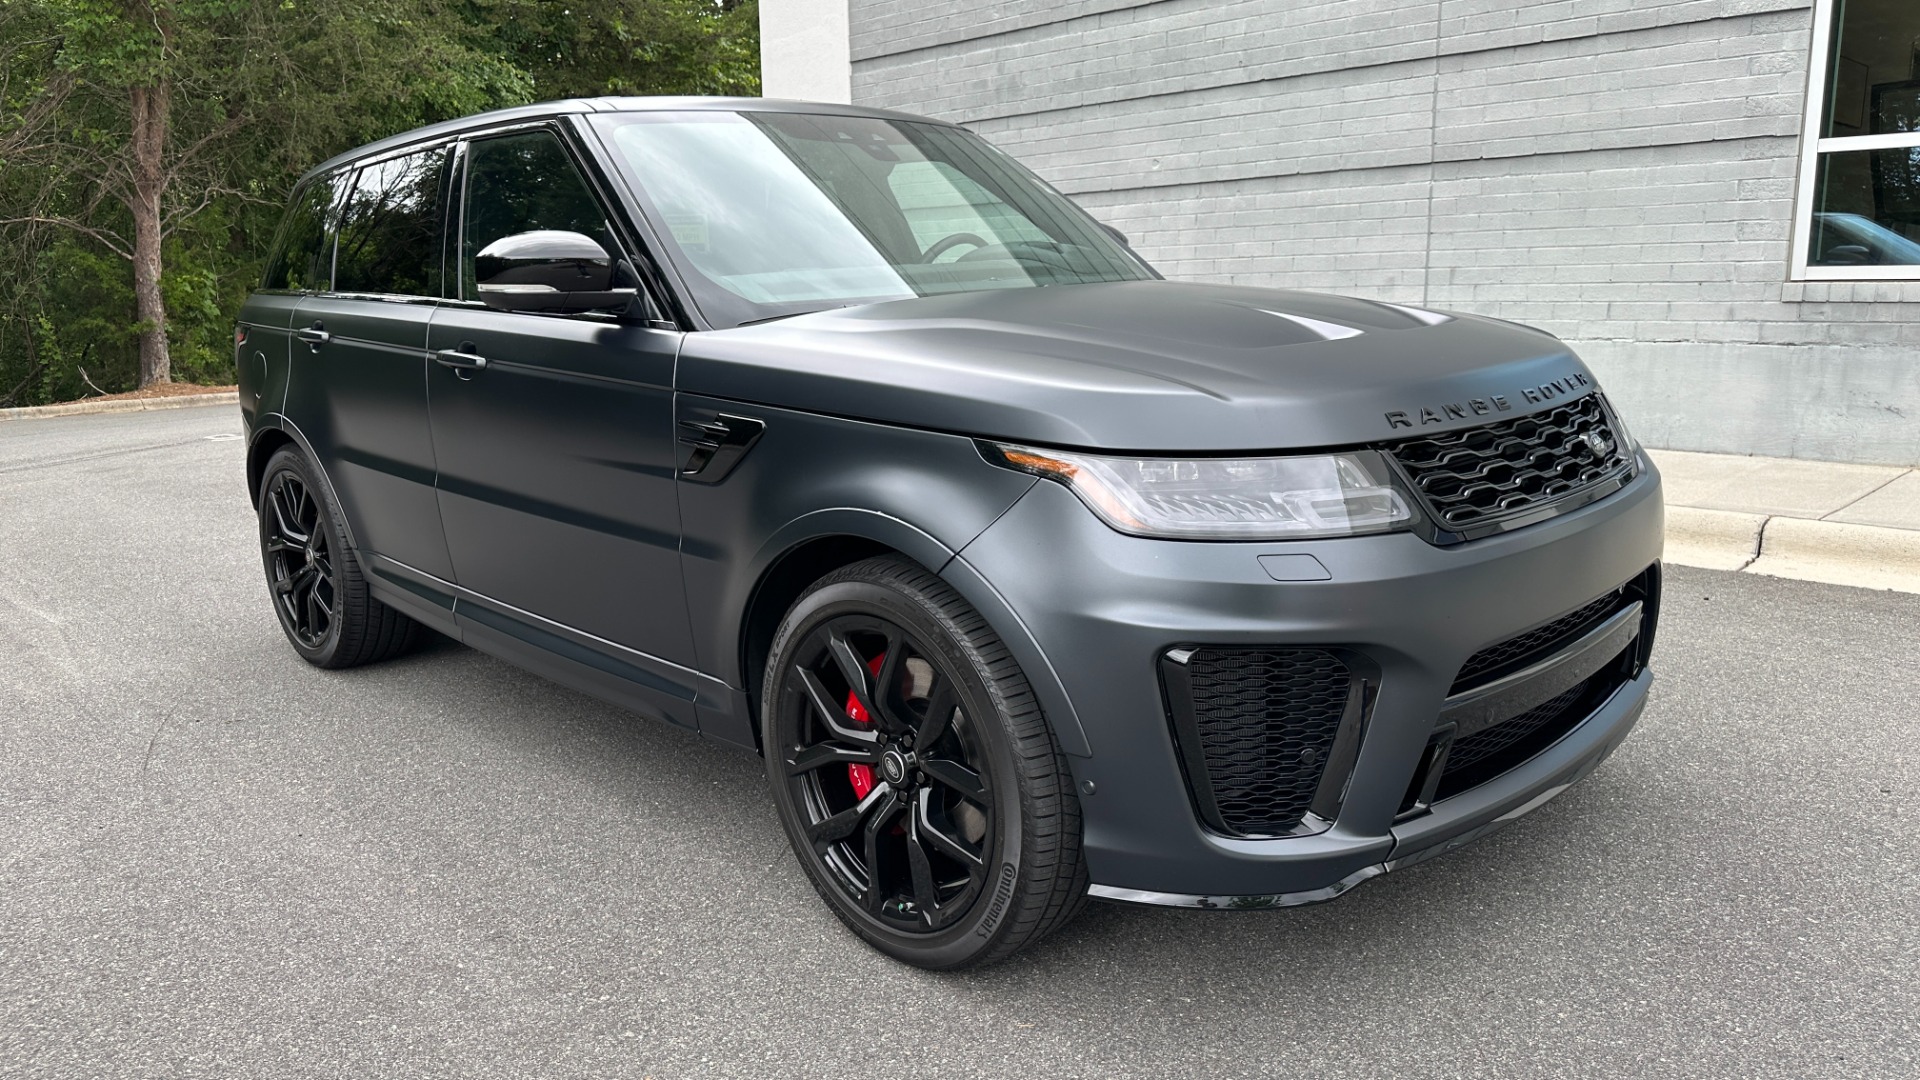 Used 2020 Land Rover Range Rover Sport SVR / SATIN SVO PAINT / DRIVE ASSIST / PREMIUM / TOW PACKAGE for sale $94,941 at Formula Imports in Charlotte NC 28227 5